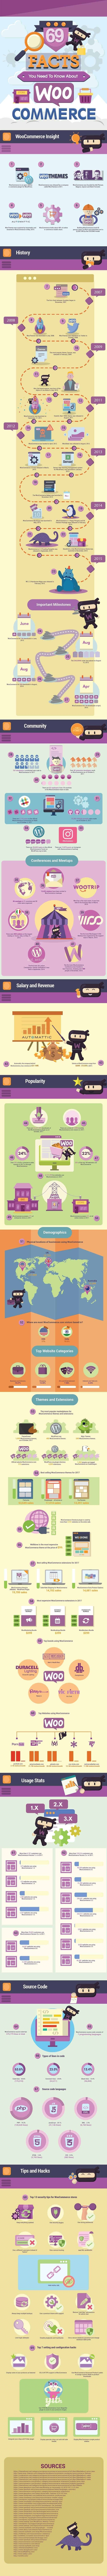 Important Facts About Woocommerce (Infographic)